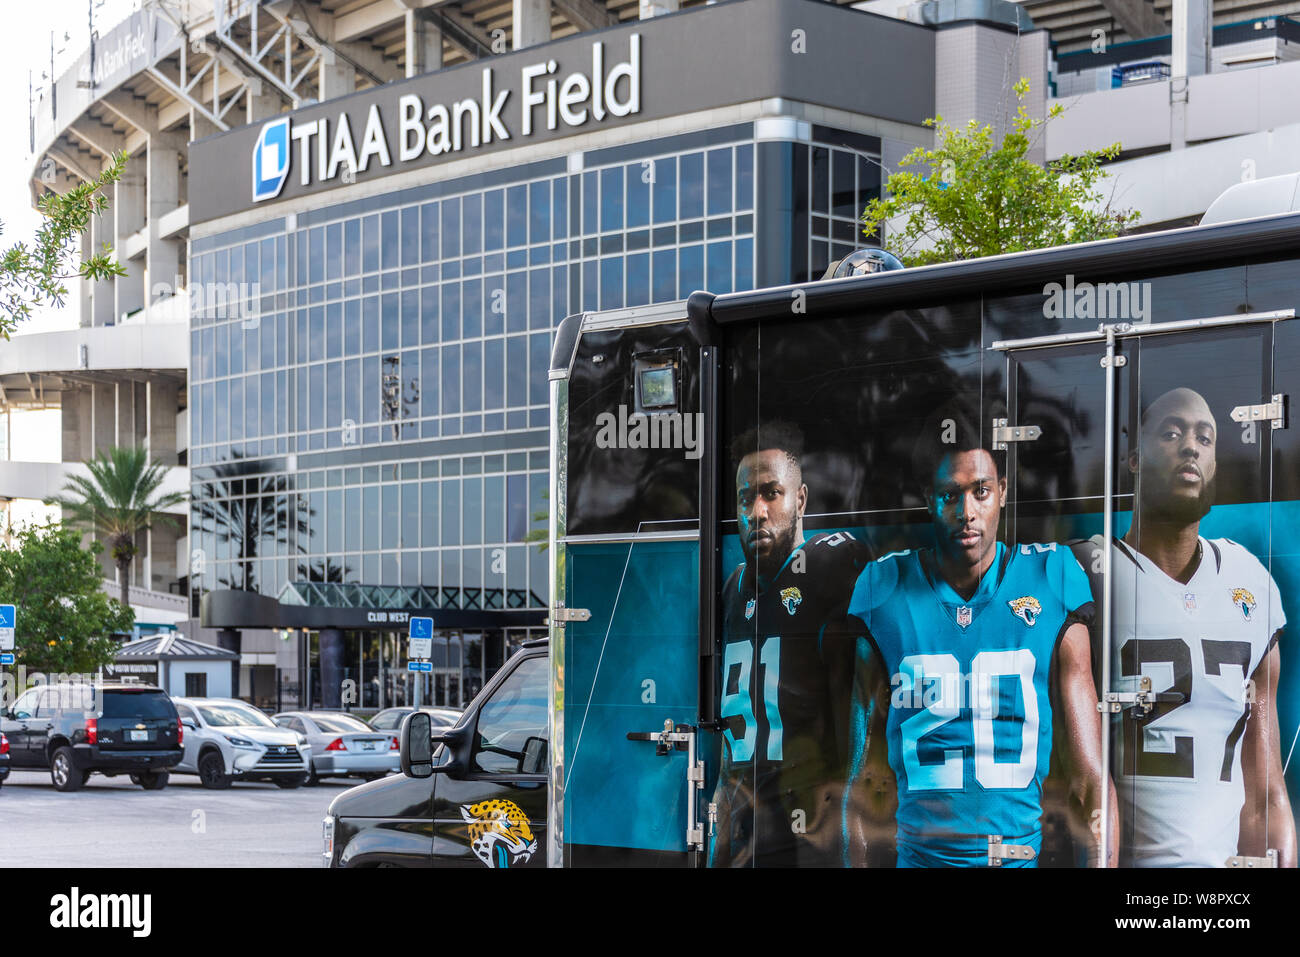 TIAA Bank Field, home of the Jacksonville Jaguars in downtown Jacksonville, Florida. (USA) Stock Photo